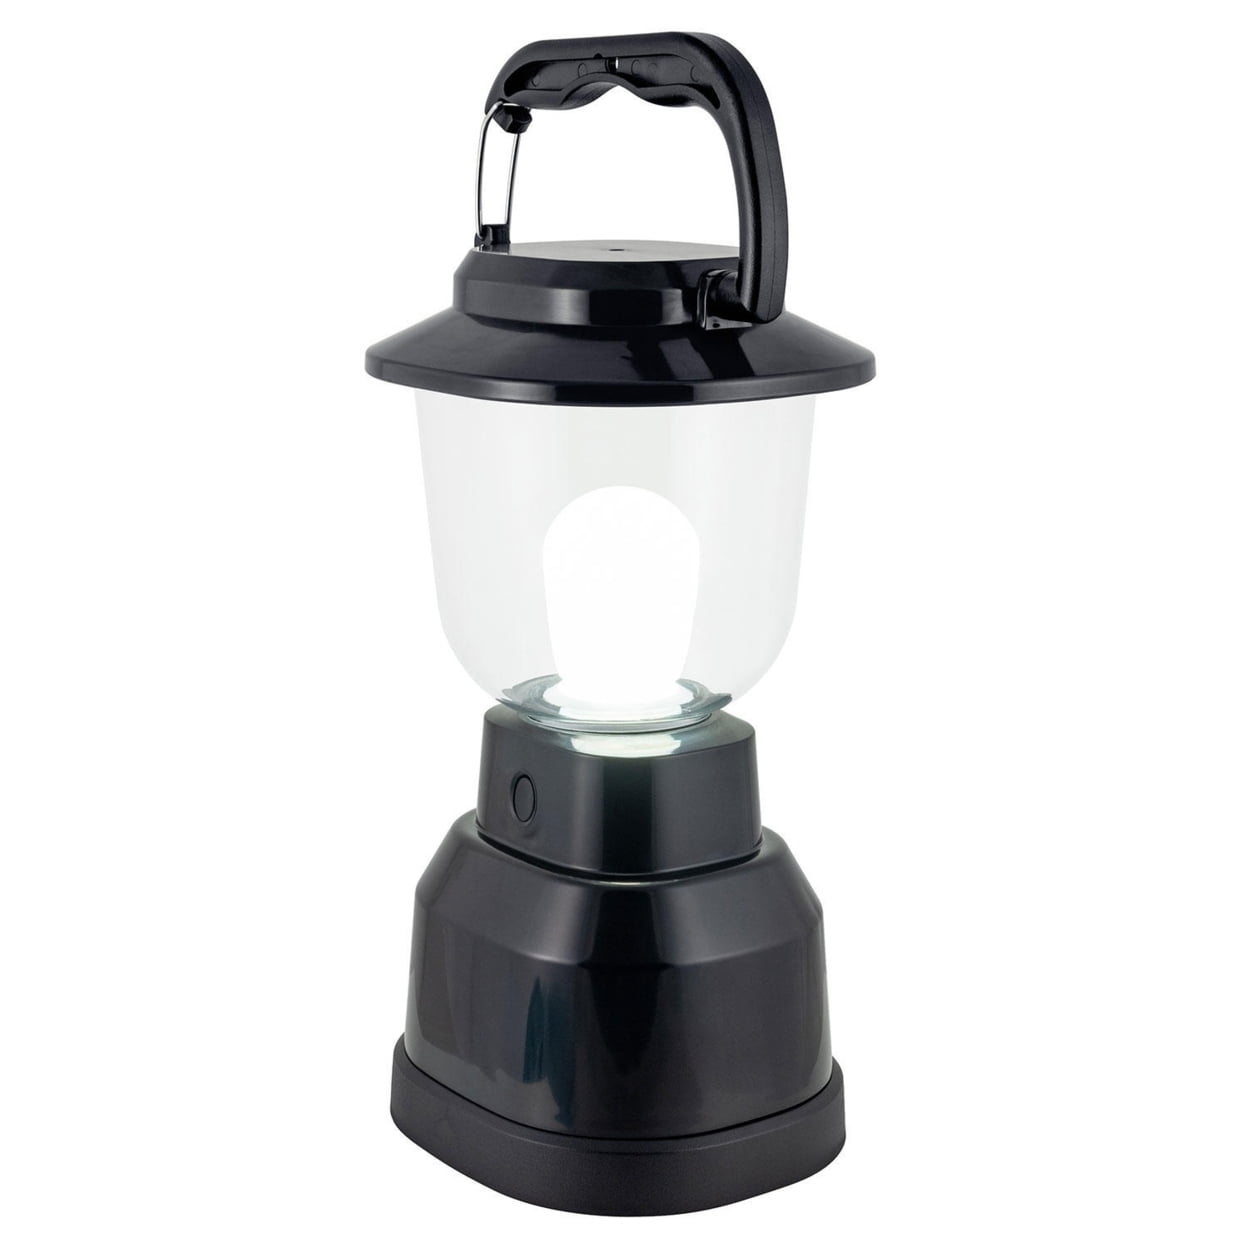 Mata1-USA LED Camping Lantern (Black), Emergency Light for Power Outages,  Long-Lasting Battery-Powered Light w/ 3 Adjustable Brightness Levels